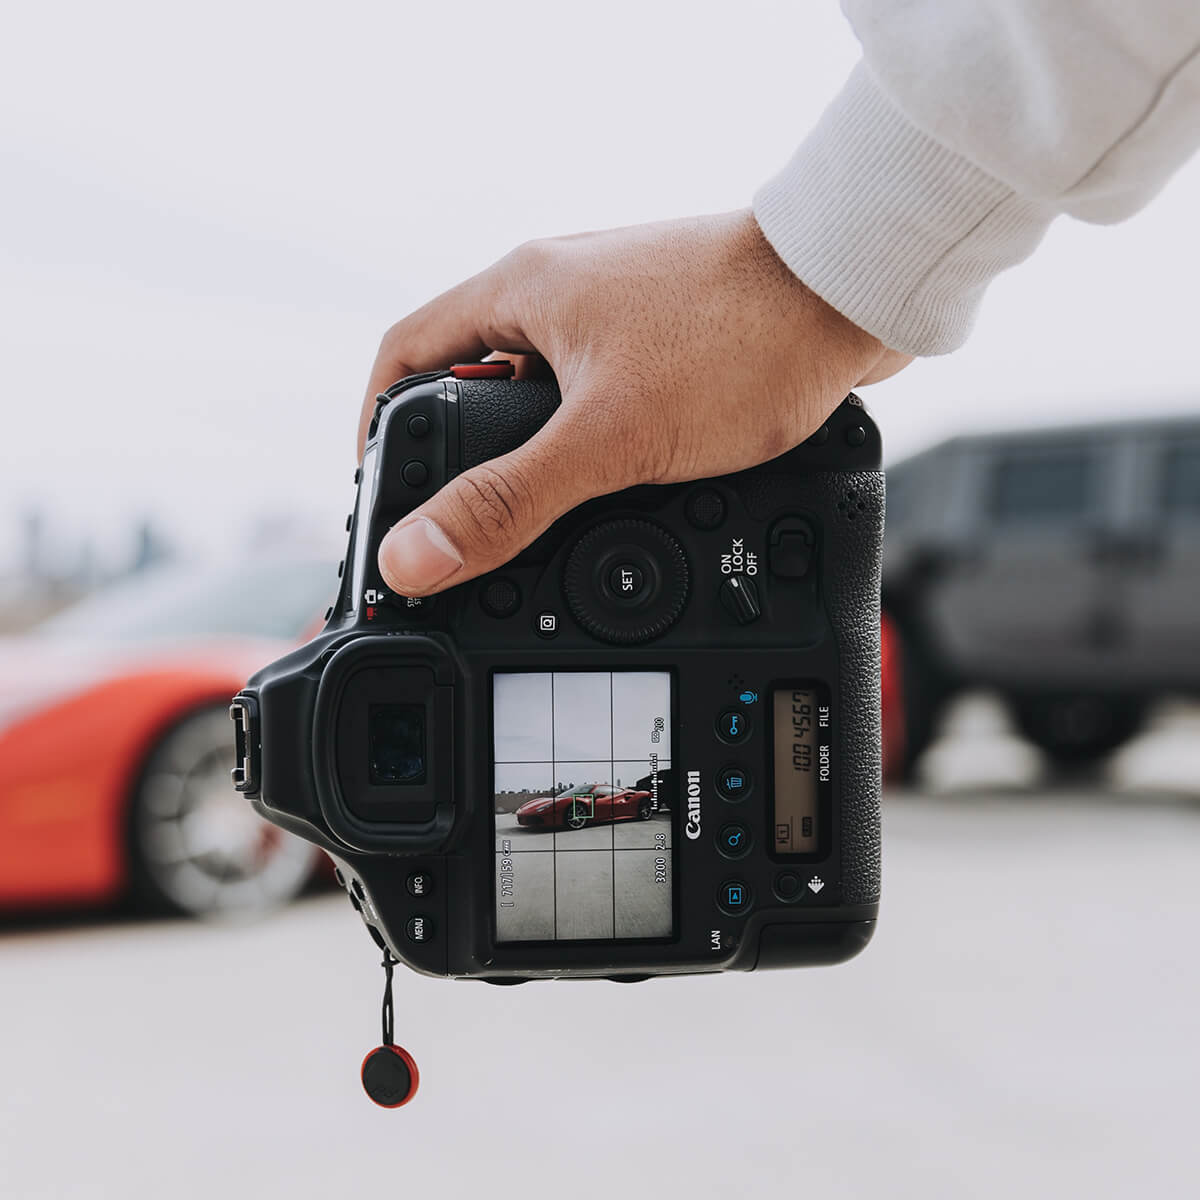 Best Canon Camera for Auto Photography